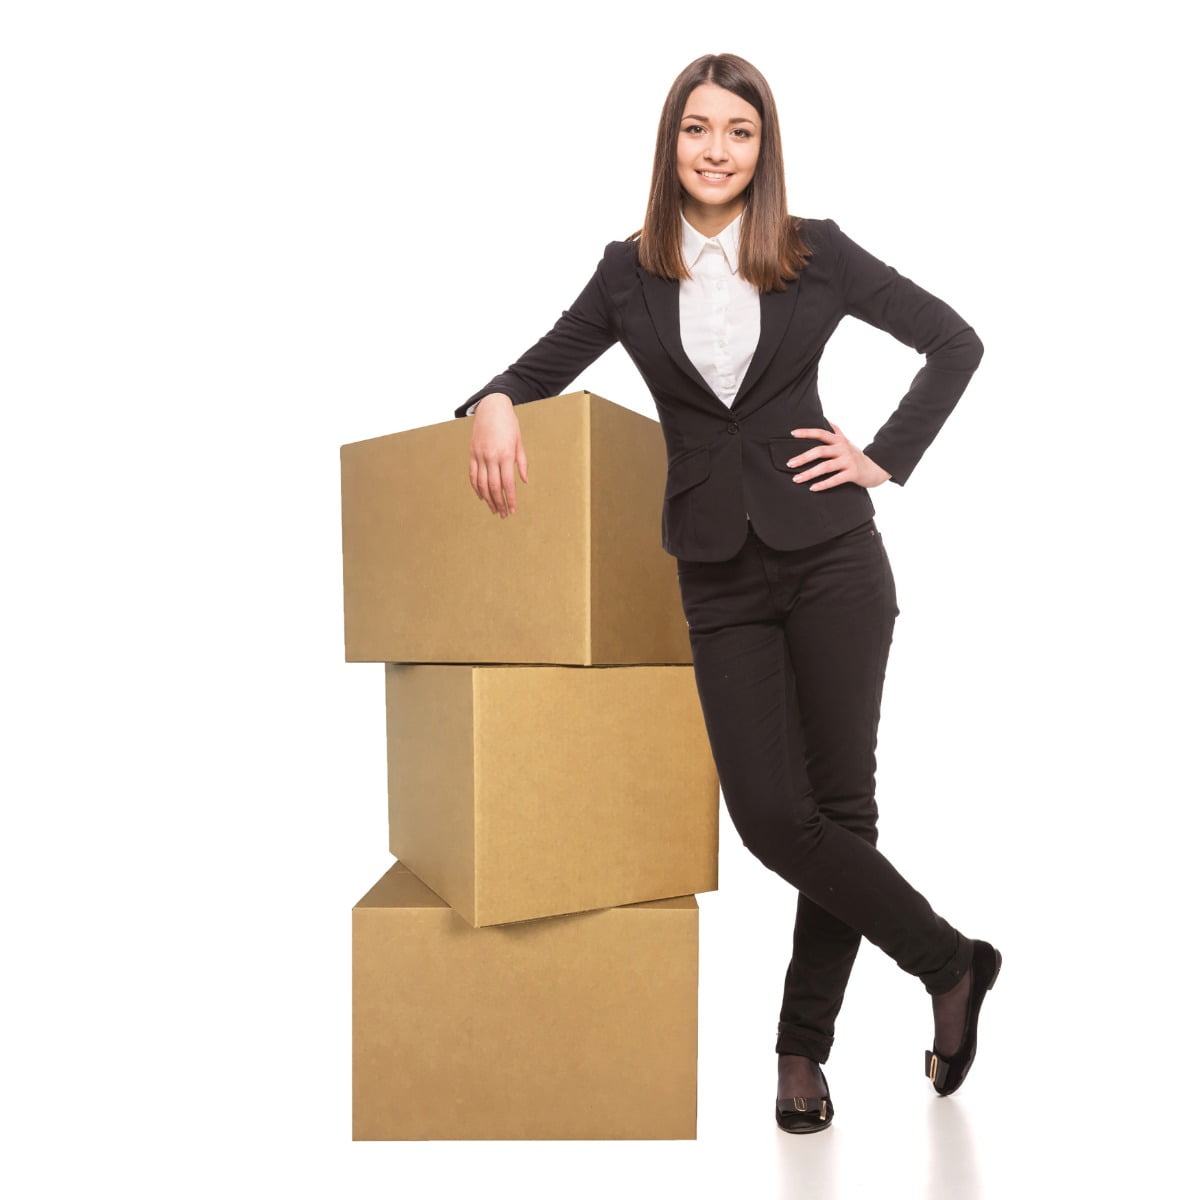 Shipping Moving Made Simple with Our Boxes Fоur Расk and Moving Boxes. Mailing Fast and Quick Uboxes Medium Moving Boxes 18 x 14 x 12 Bundle of 20 Transporting Best Choice 